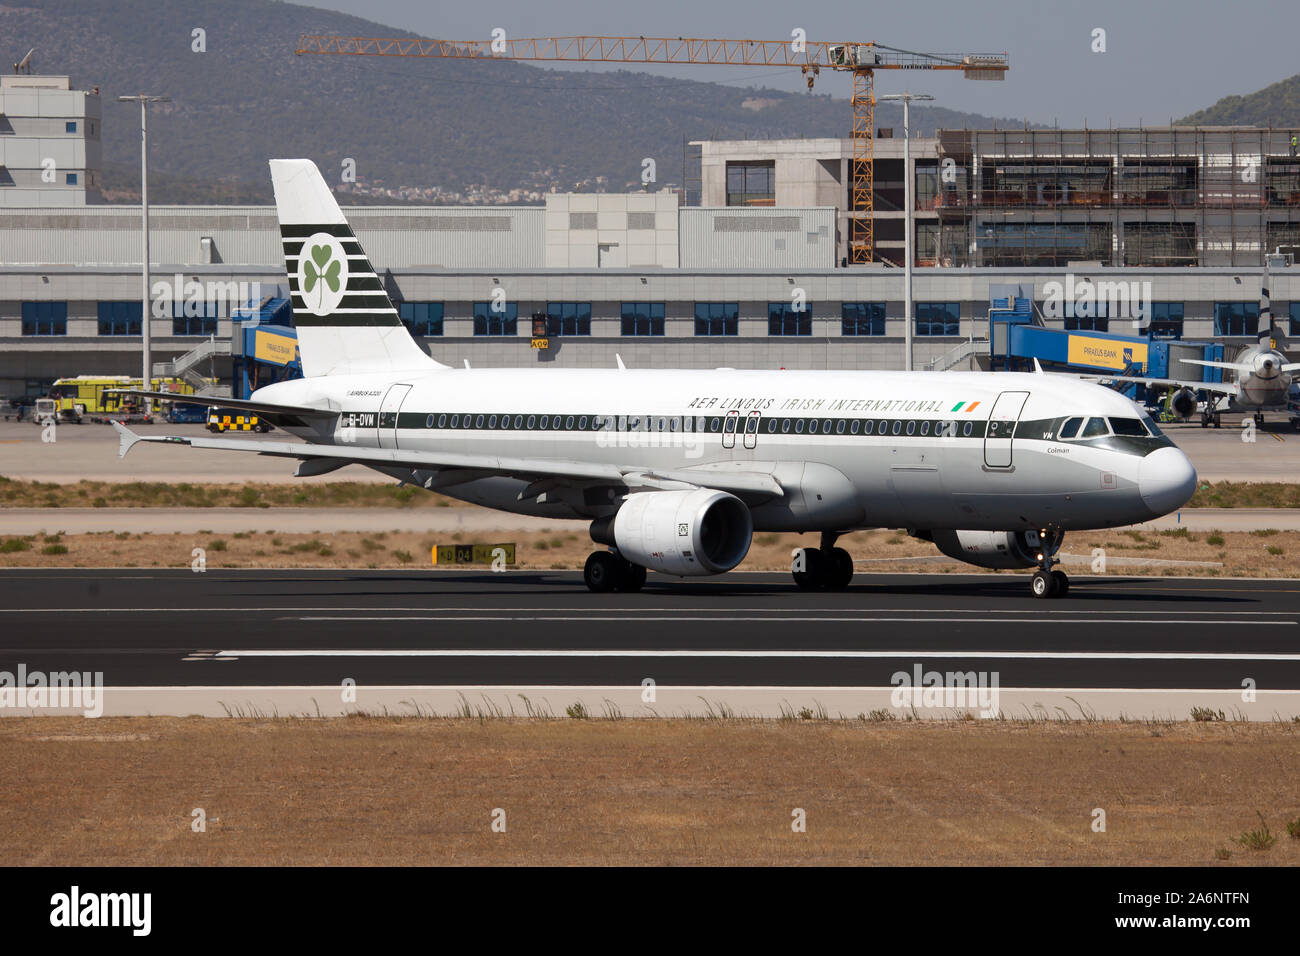 An Aer Lingus Airbus 320 in retro livery running out Athens' airport. Stock Photo